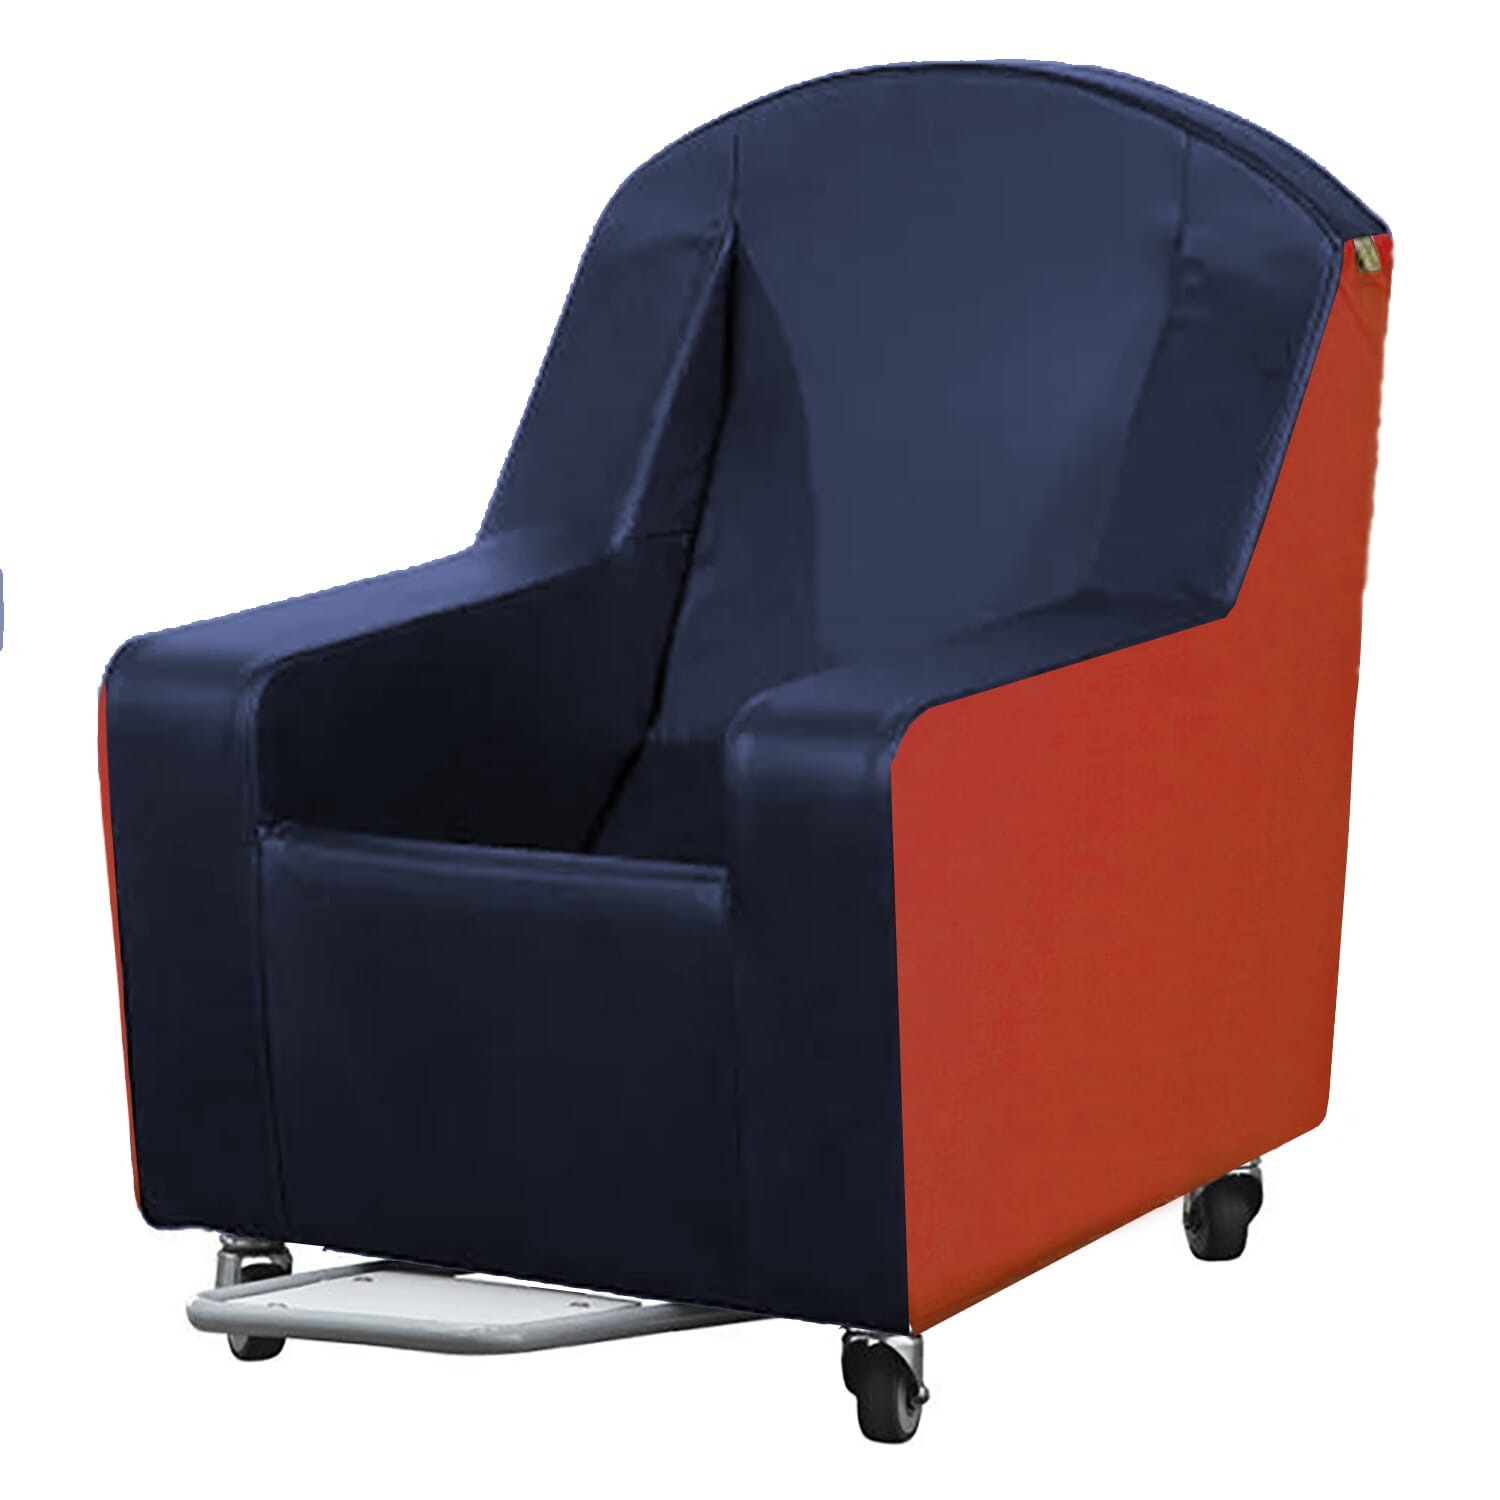 View Kirton Stirling Chair with Sliding Footrest Navy Dartex Purely Vinyl information